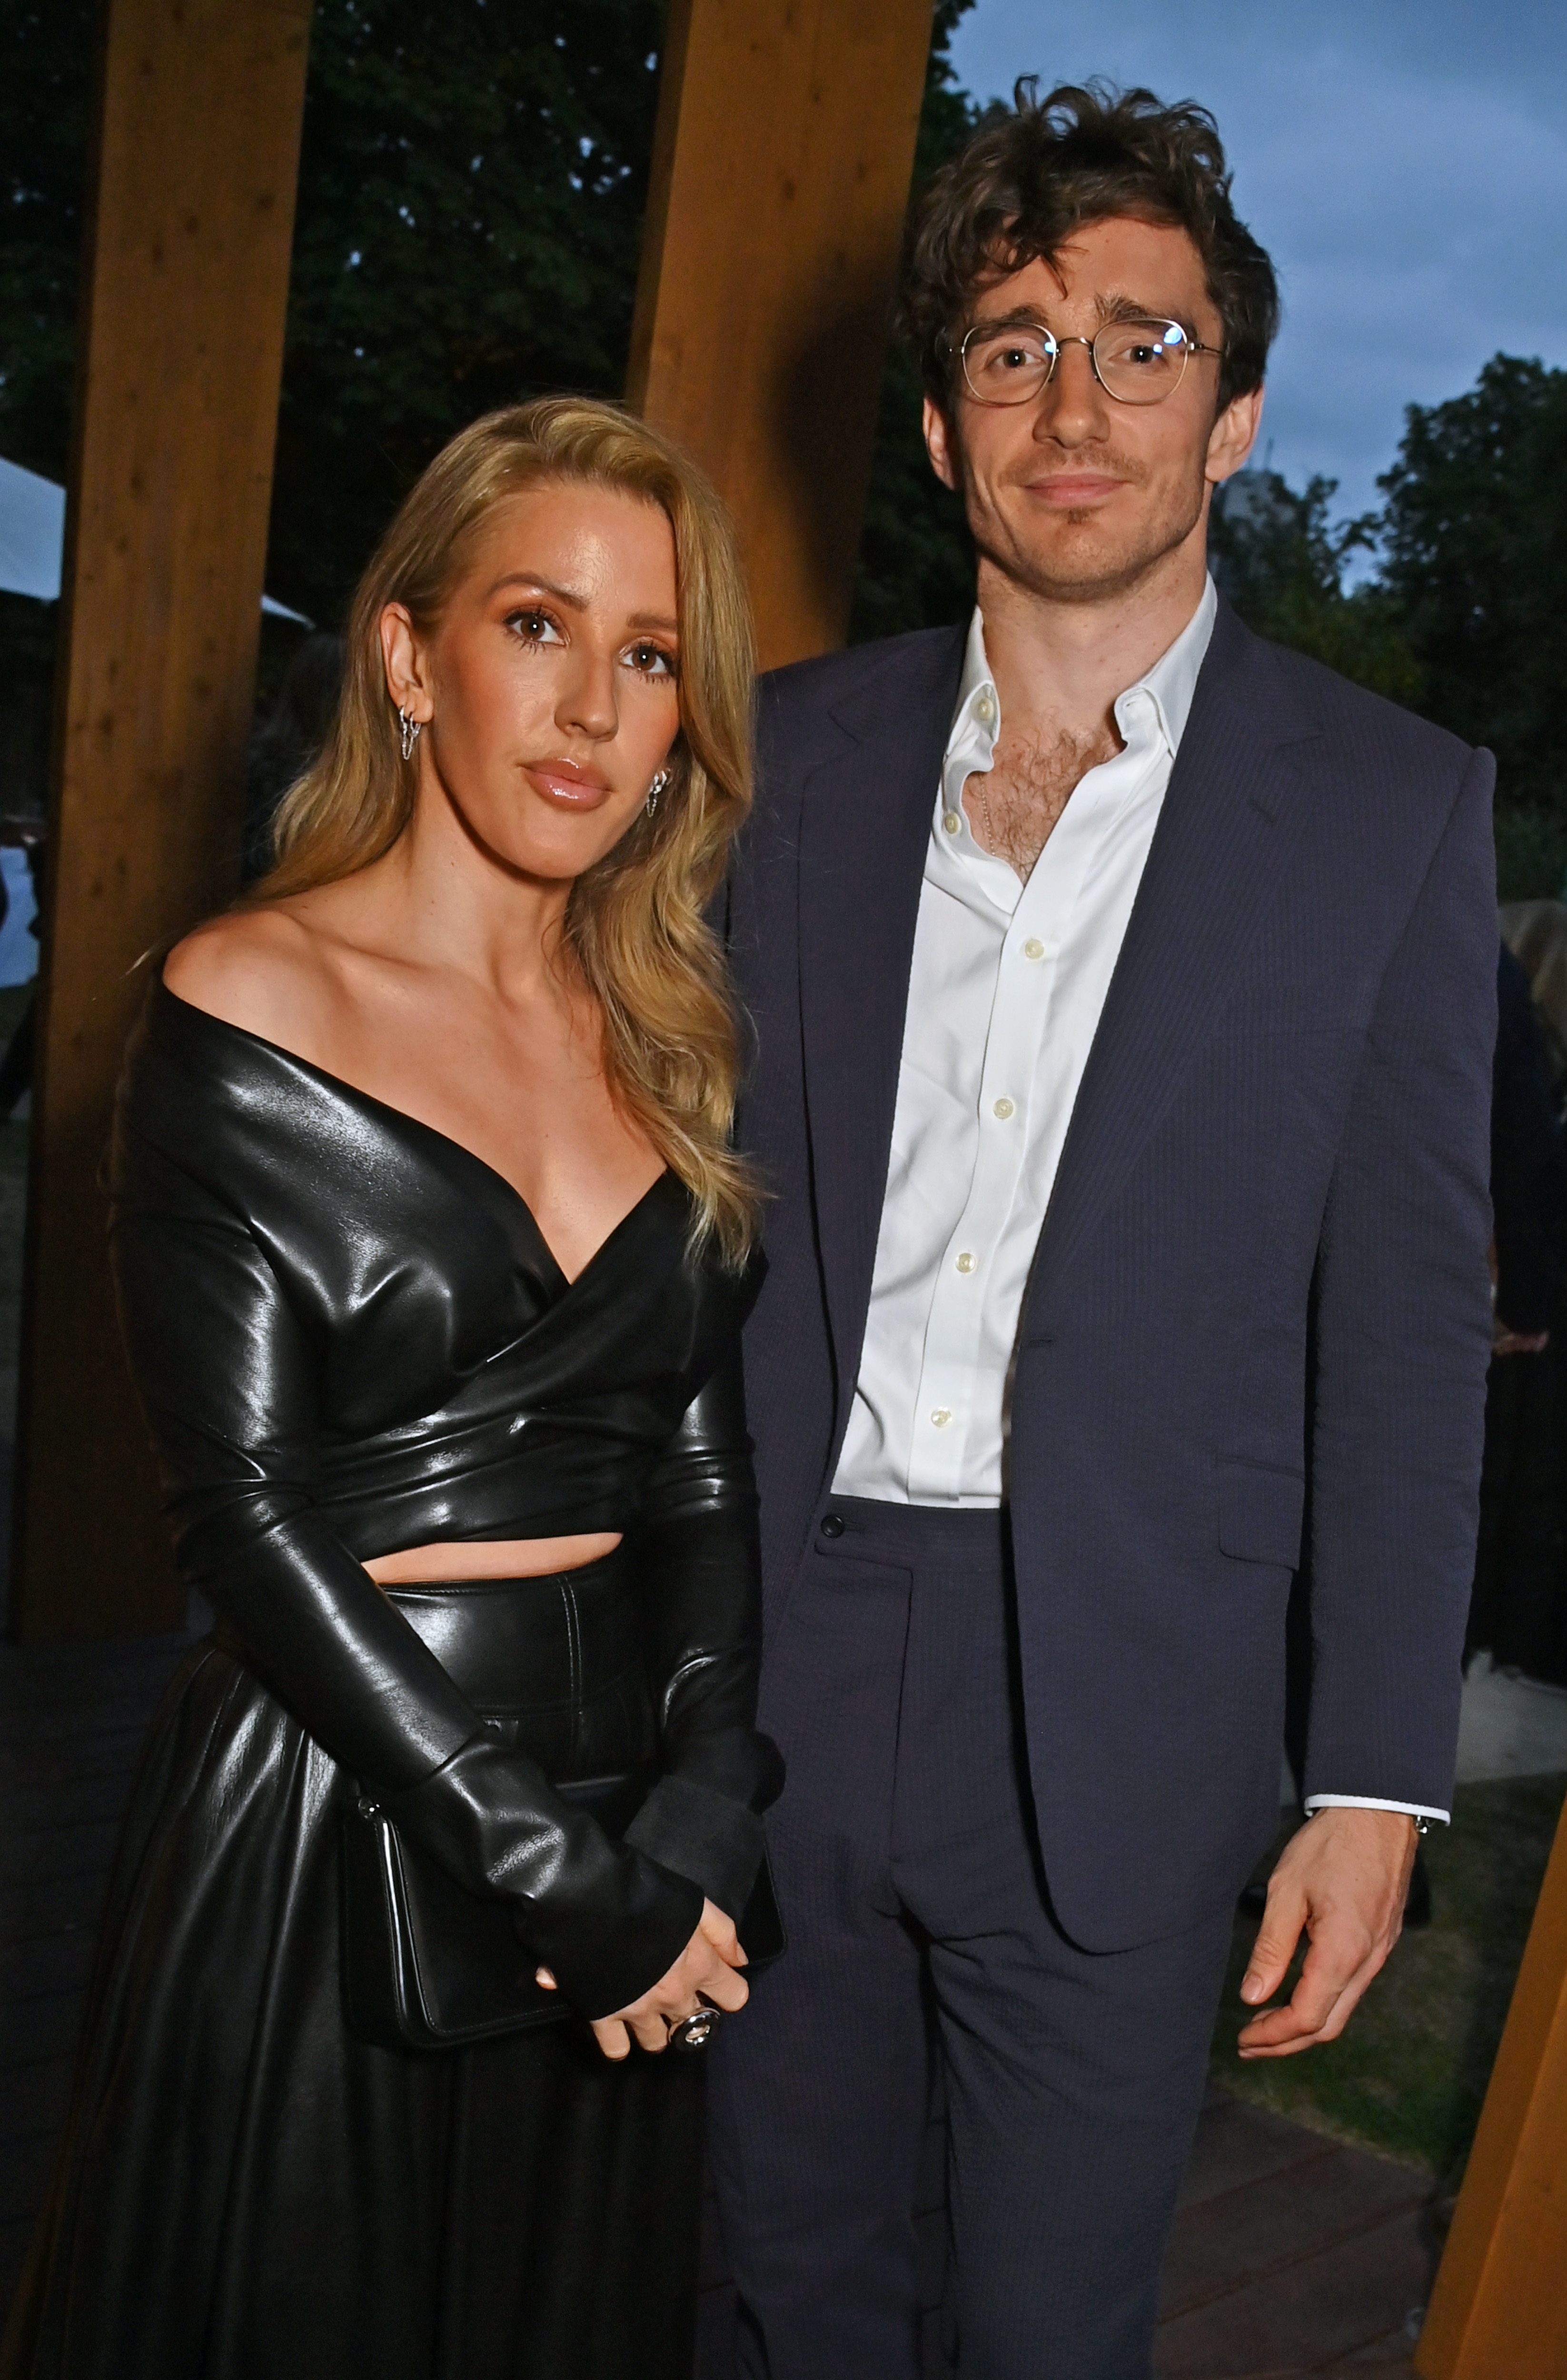 A source has confirmed Ellie and husband Caspar Jopling are in the process of splitting up